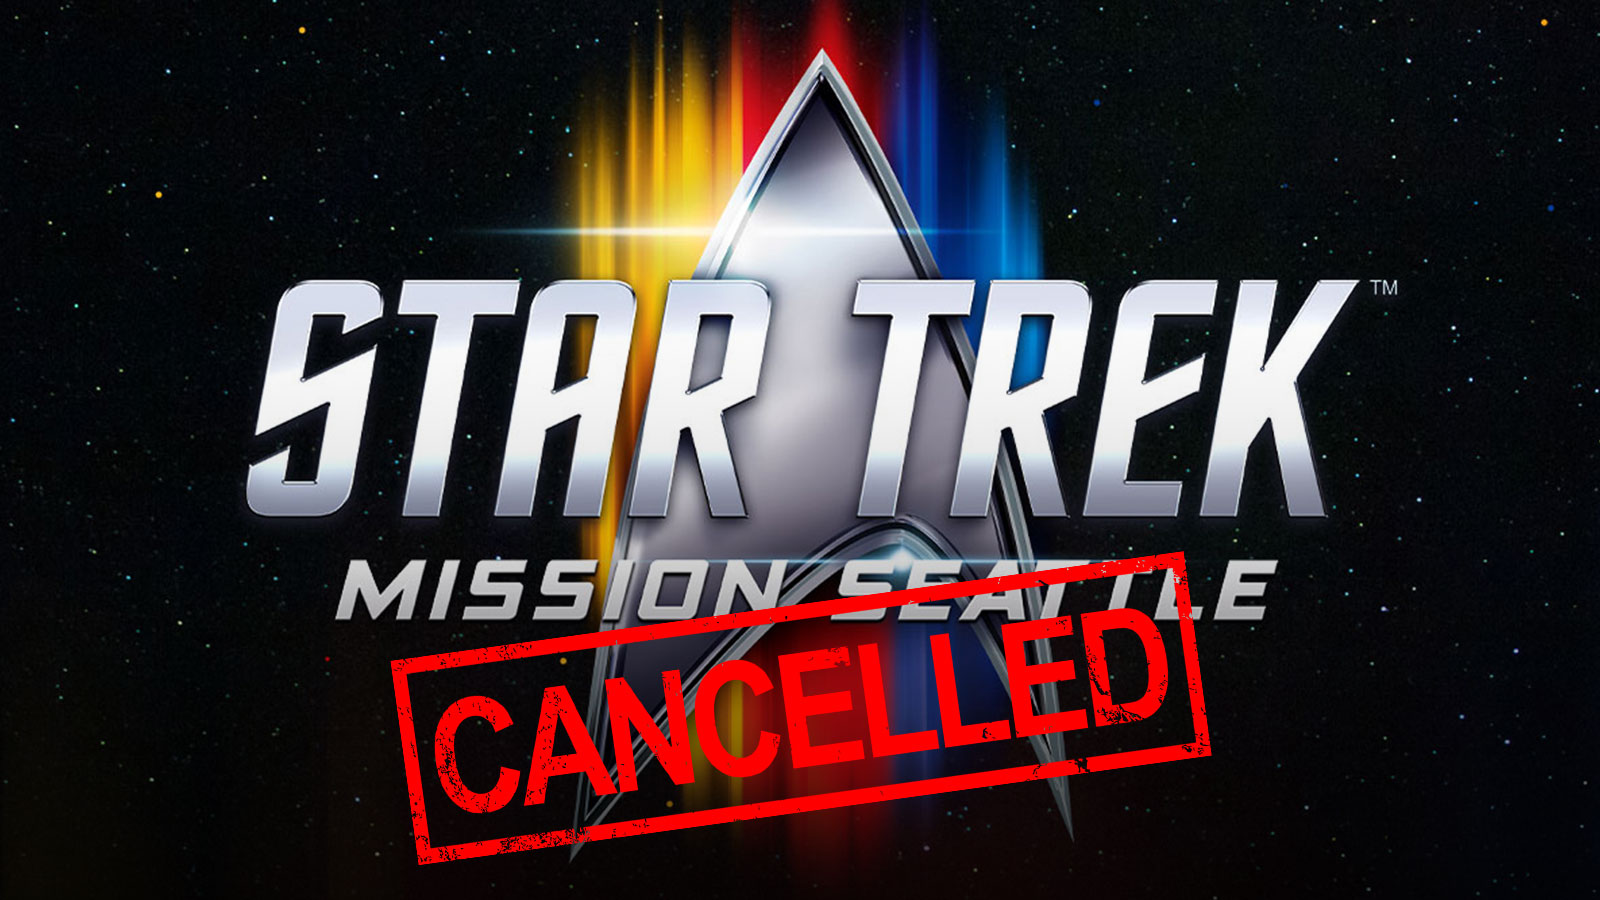 ReedPop’s Star Trek: Mission Seattle convention has been cancelled